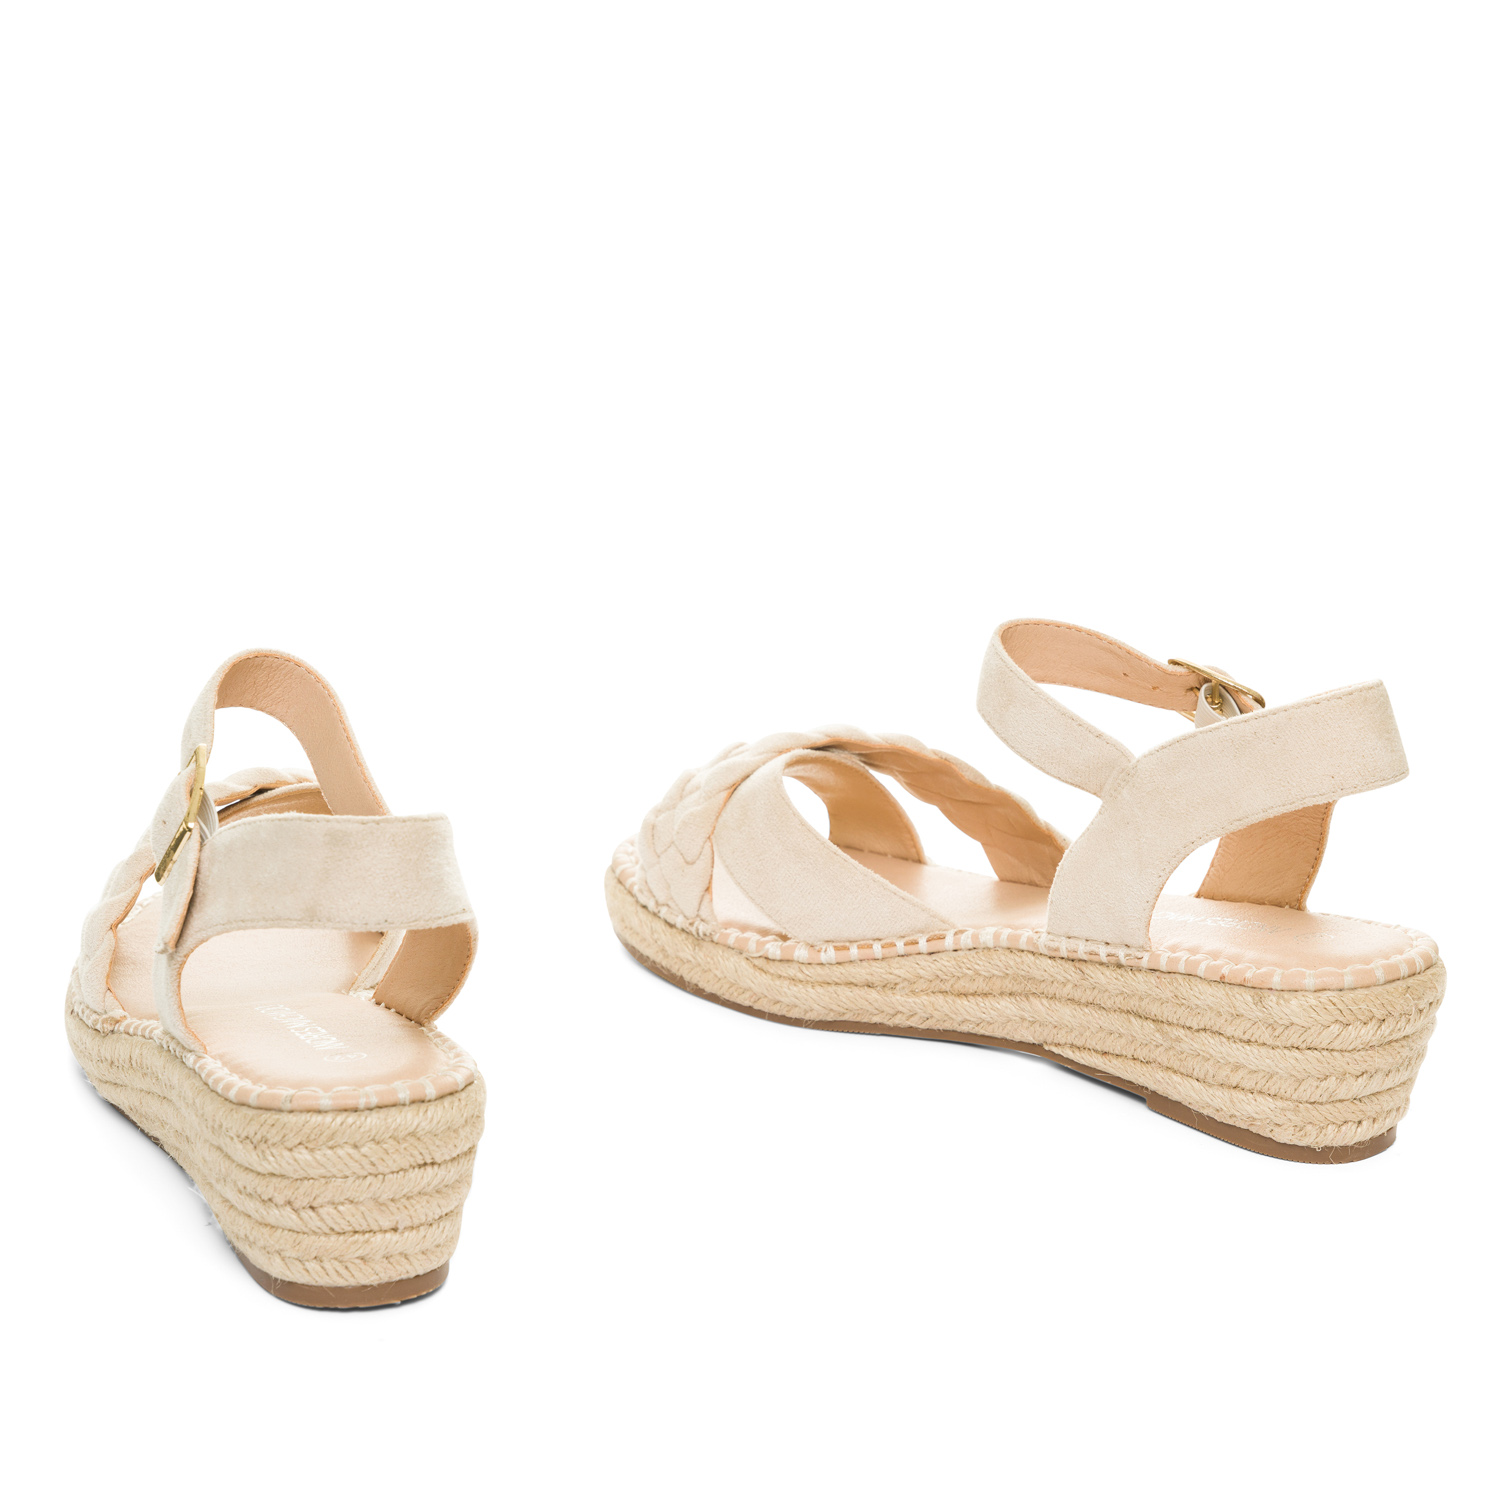 Off-white faux suede sandals with jute wedge 